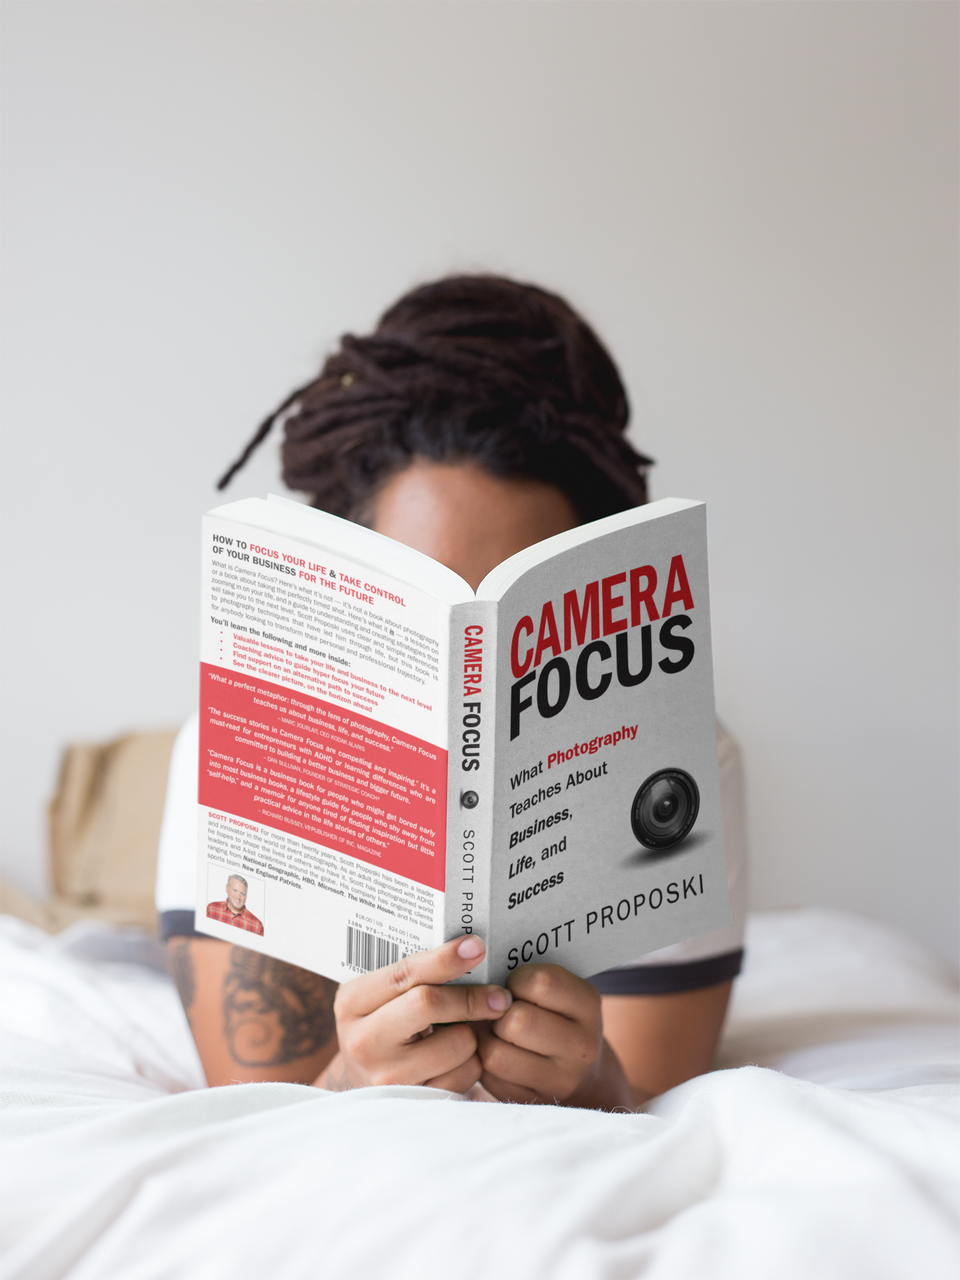 Girl with dreadlocks reading a book mockup while in bed a17301